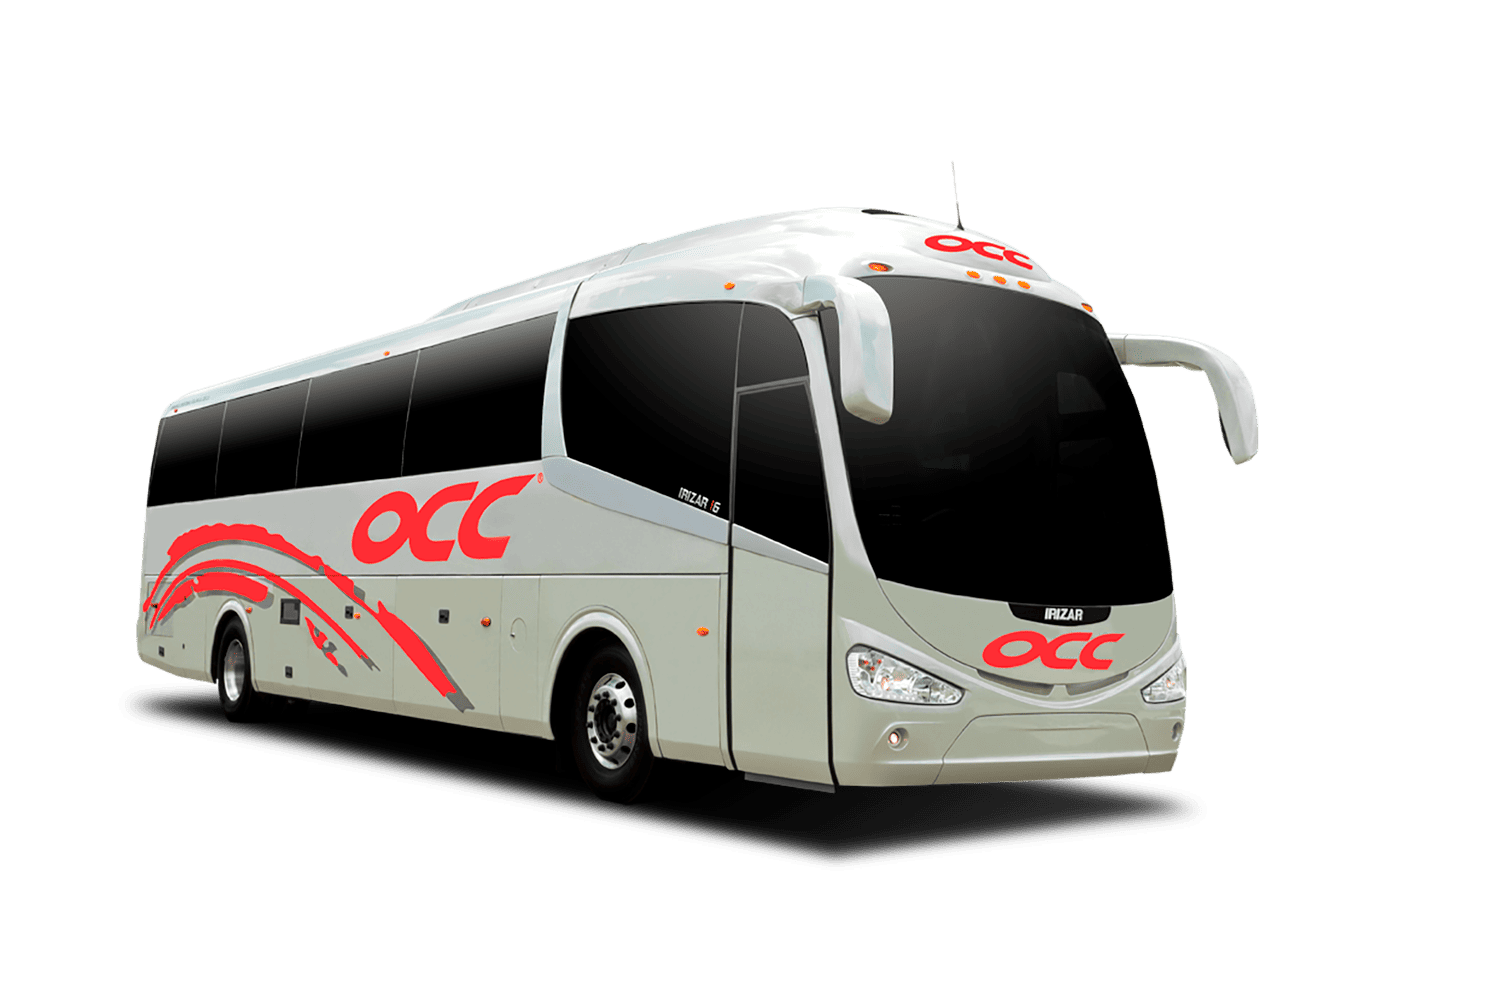 How To Get From San Cristobal de las Casas to Palenque By Bus - All Possible Ways, cheapest way from San Cristobal de las Casas to Palenque, San Cristobal to Palenque, San Cristobal de las Casas to Palenque, ado bus from San Cristobal de las Casas to Palenque, occ bus from San Cristobal de las Casas to Palenque, shared van from San Cristobal de las Casas to Palenque, Colectivo from San Cristobal de las Casas to Palenque, Uber from San Cristobal de las Casas to Palenque, taxi from San Cristobal de las Casas to Palenque